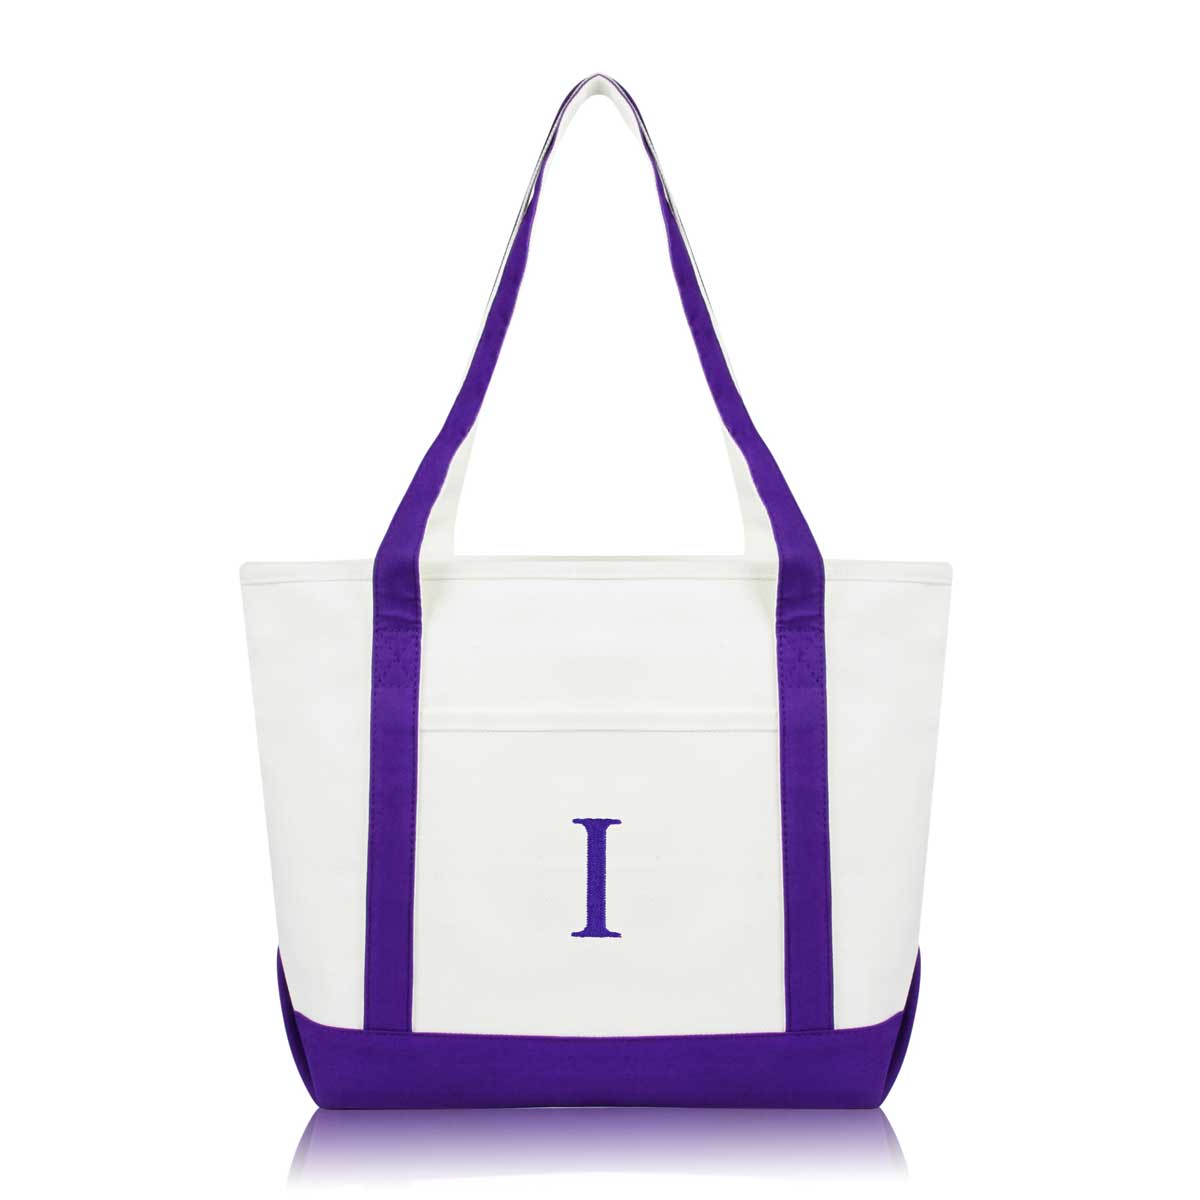 Dalix Medium Personalized Tote Bag Monogrammed Initial Letter - I